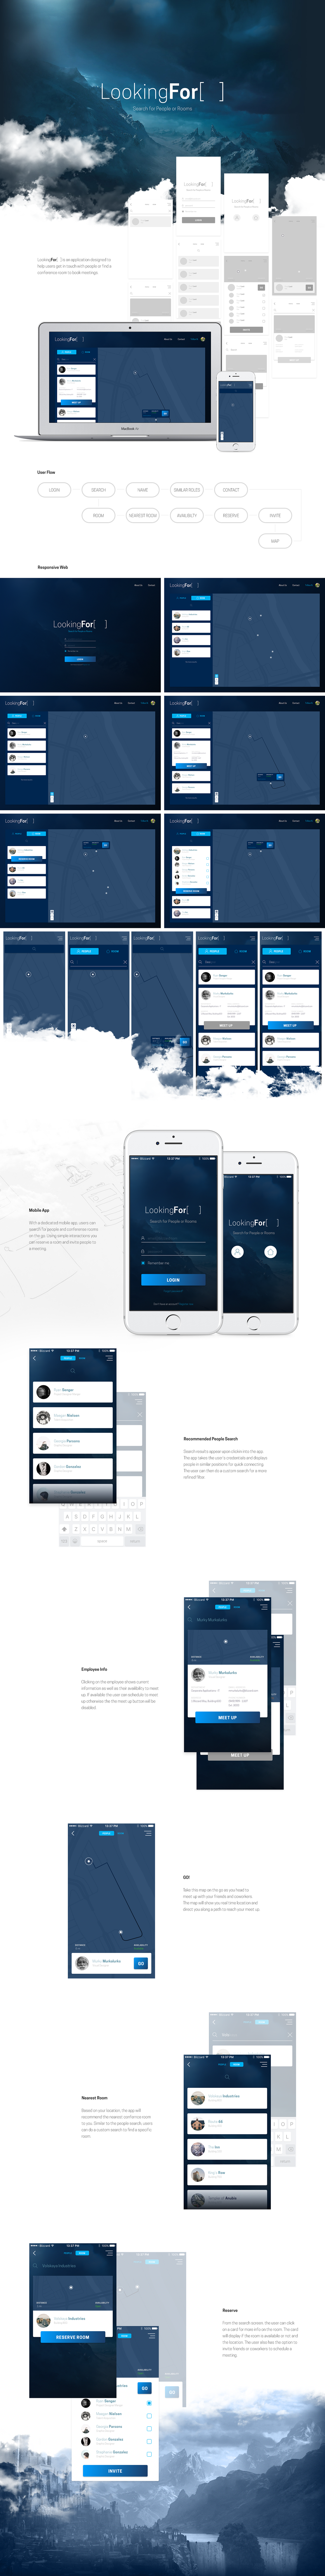 UI ux mobile graphic design  Responsive interaction Layout search